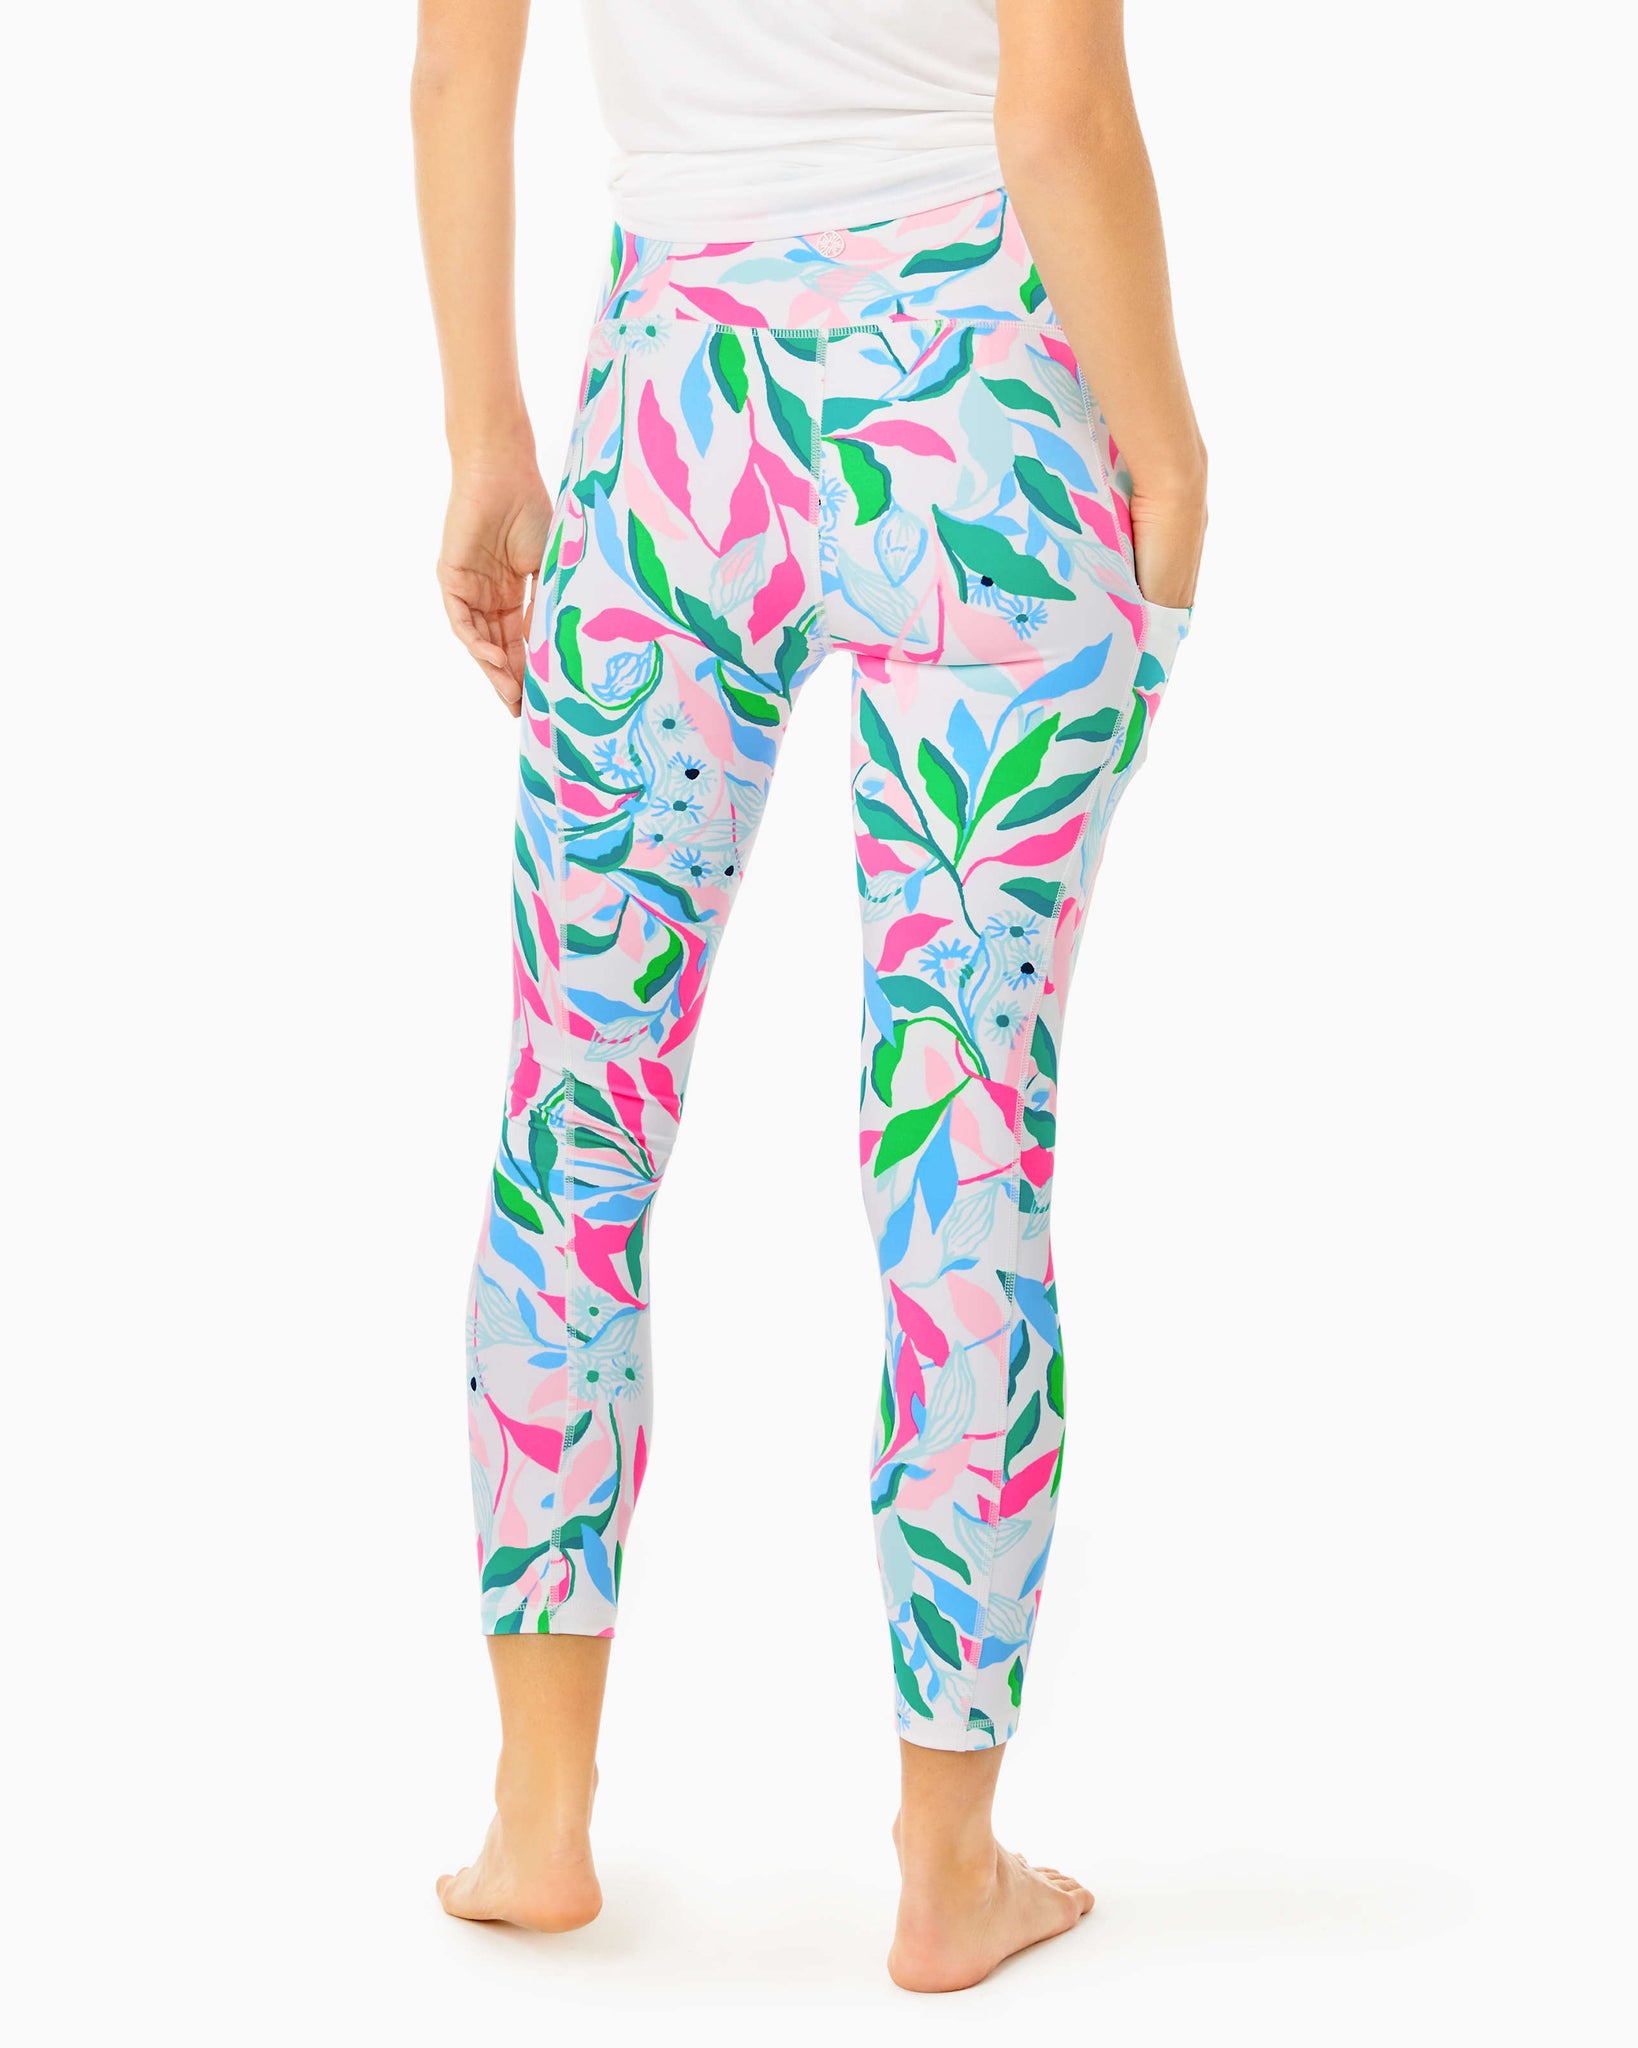 LILLY PULITZER Luxletic Weekender High Rise Leggings GOT YOUR BACK